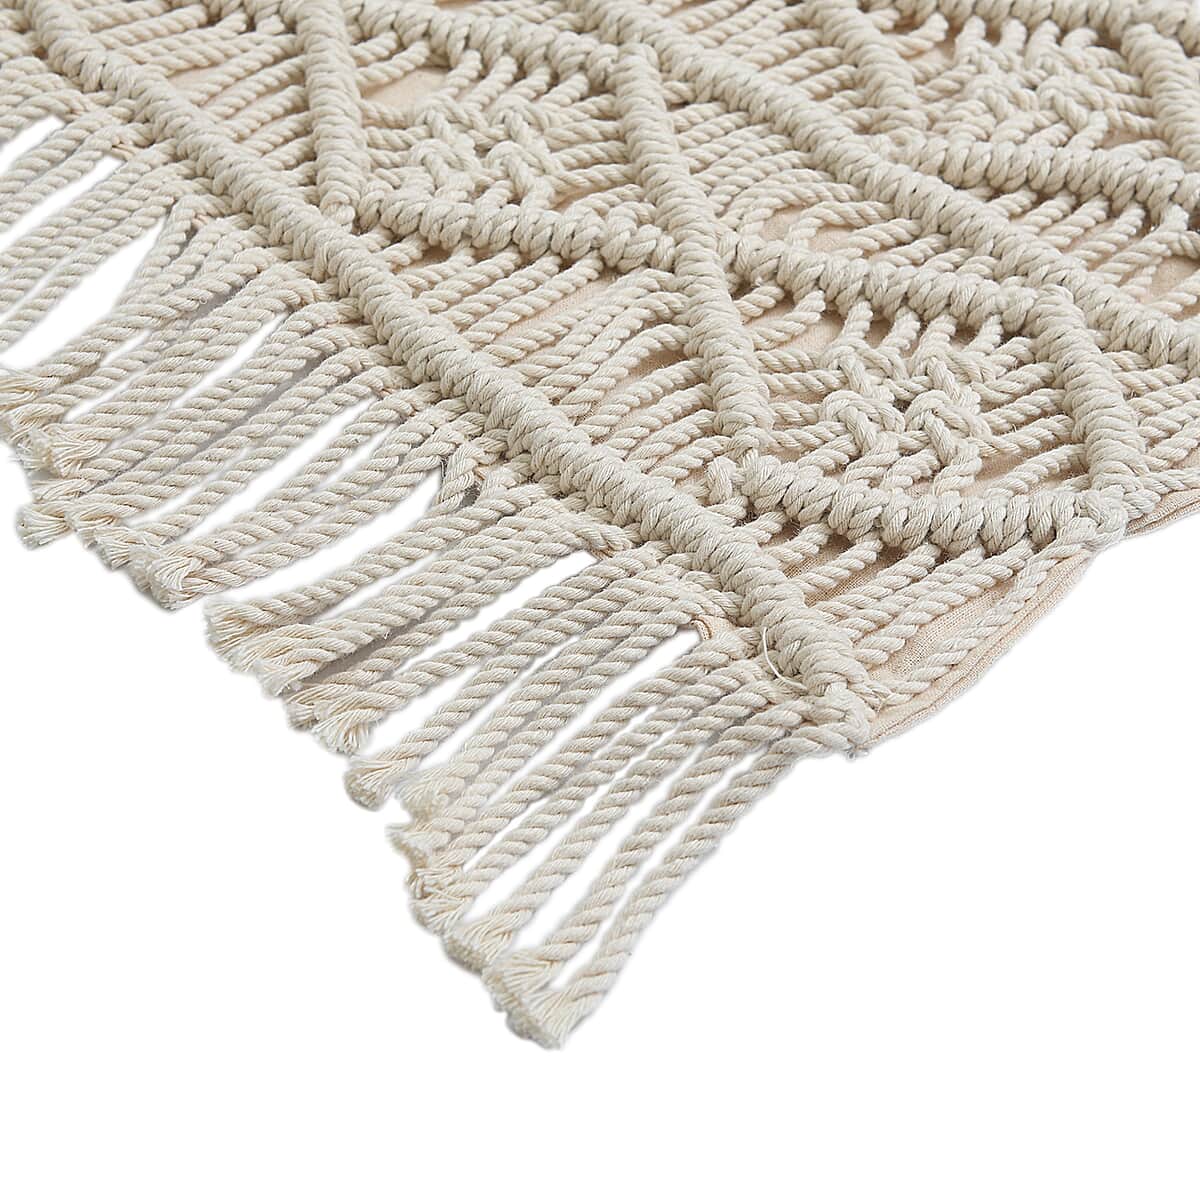 HOMESMART Set of 2 Cream Cotton Macrame Cushion Covers image number 5